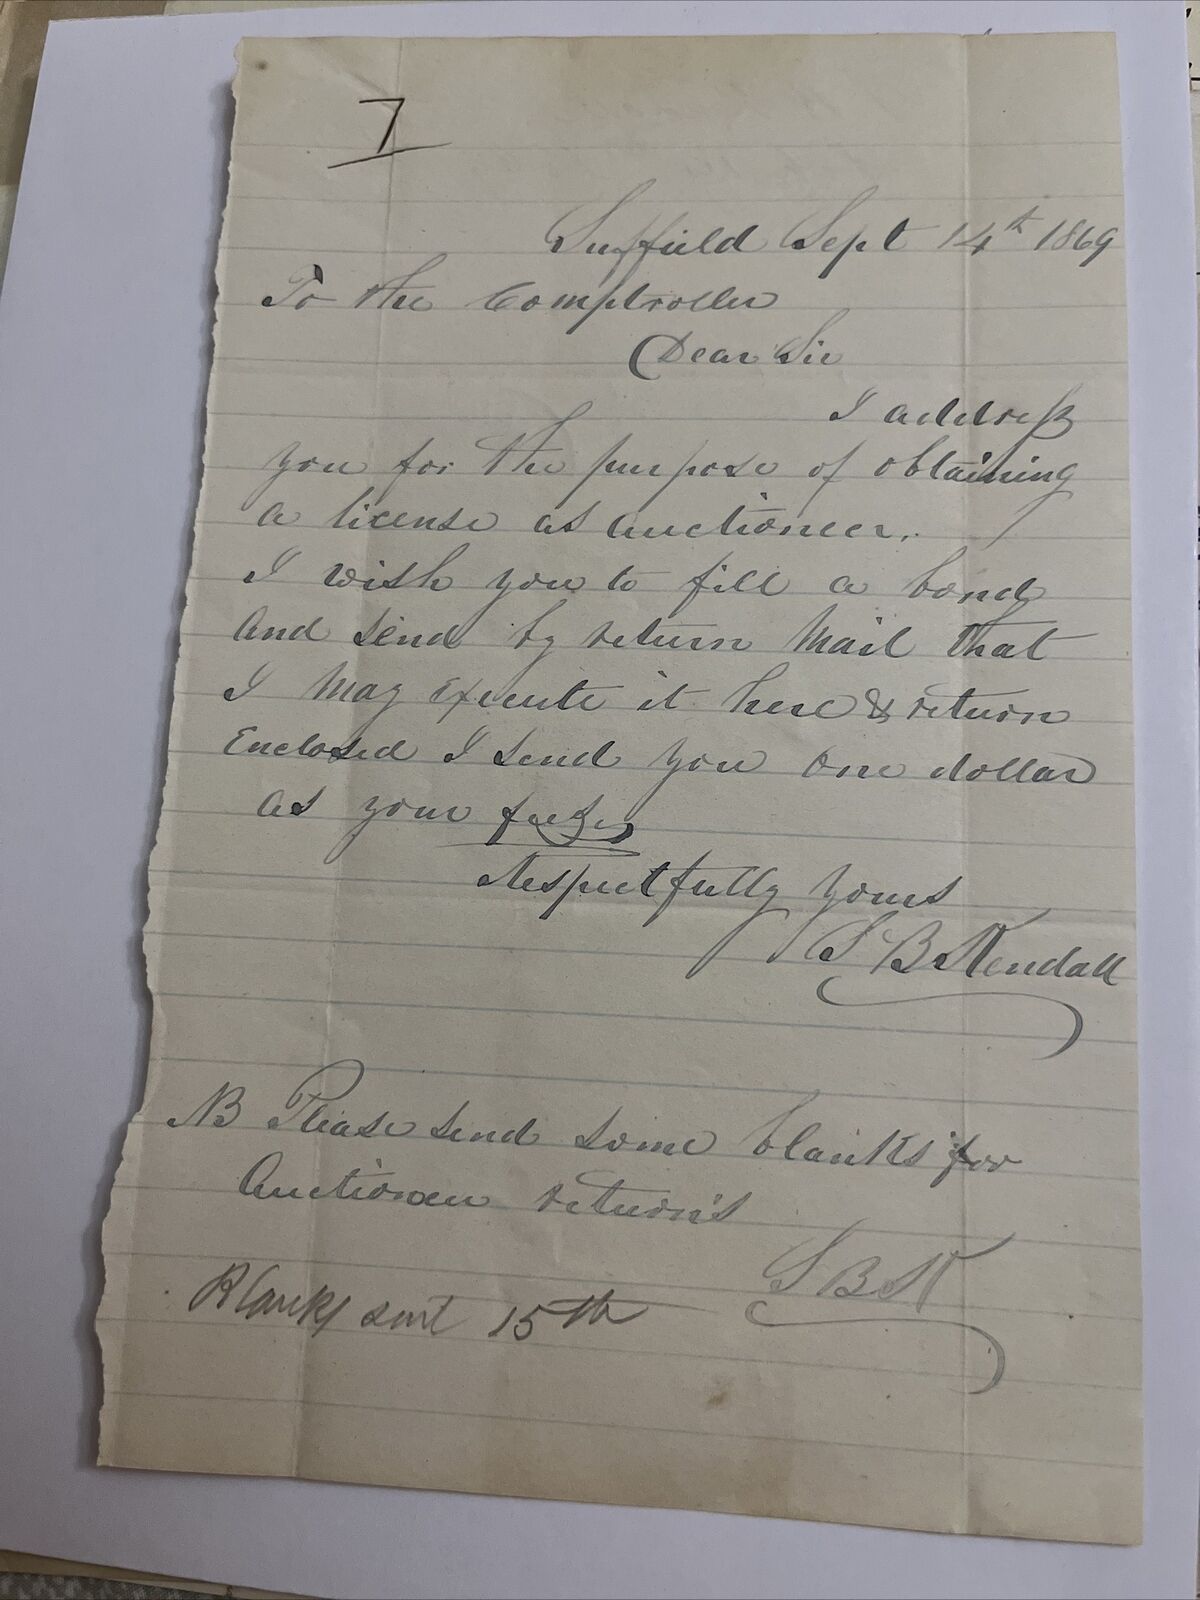 1869 Letter to Comptroller Requesting an Auctioneer License Suffield Connecticut